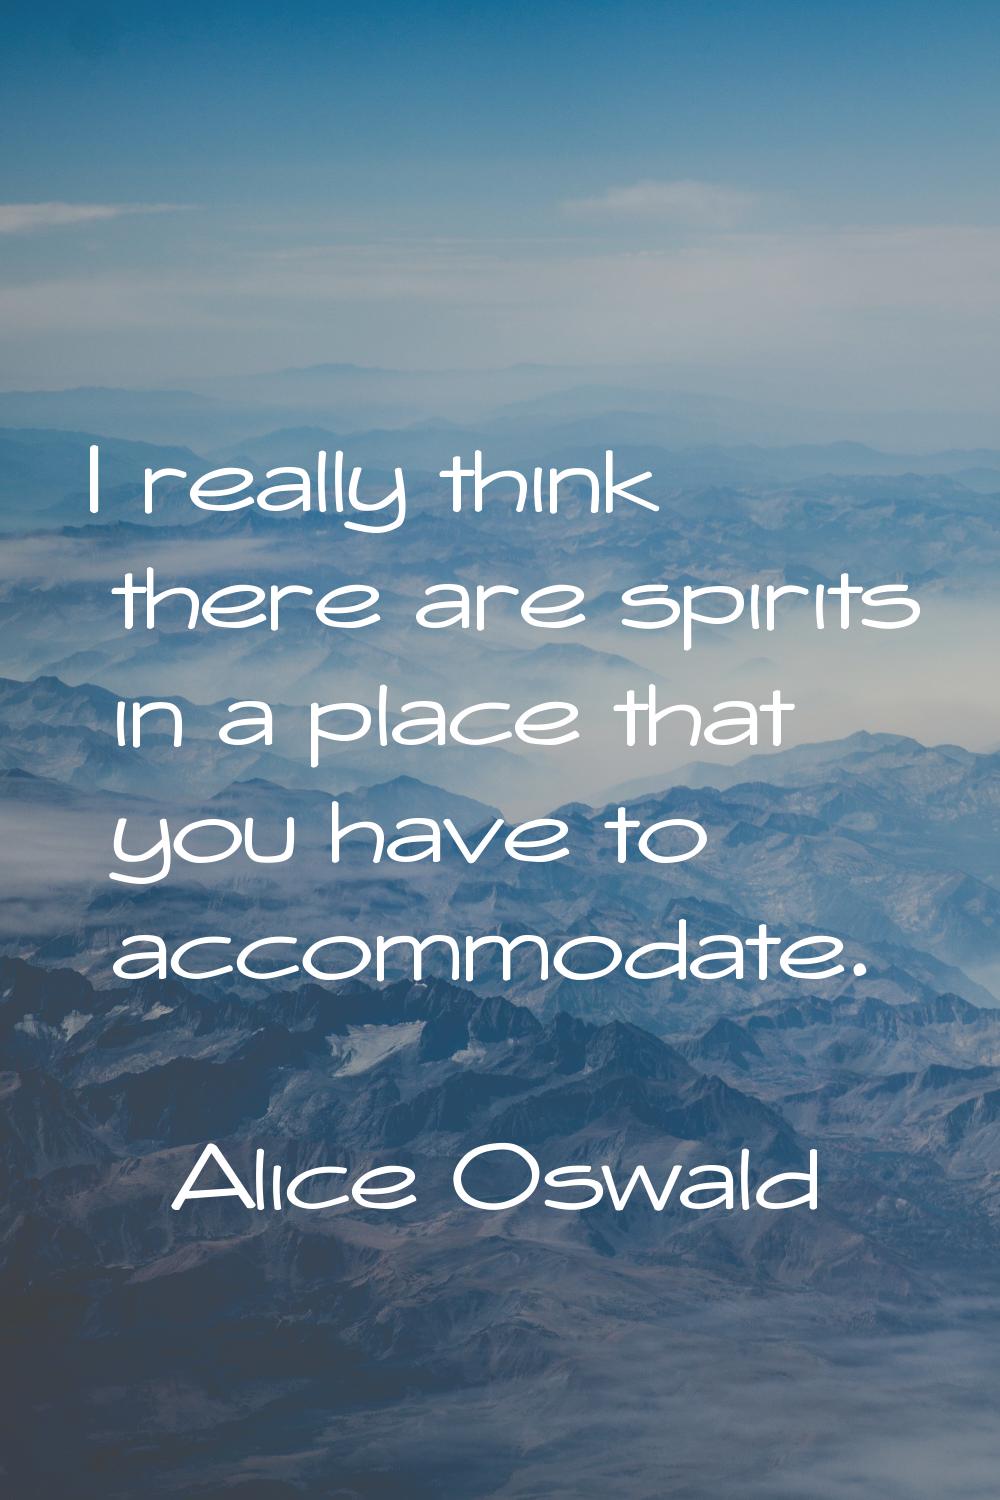 I really think there are spirits in a place that you have to accommodate.